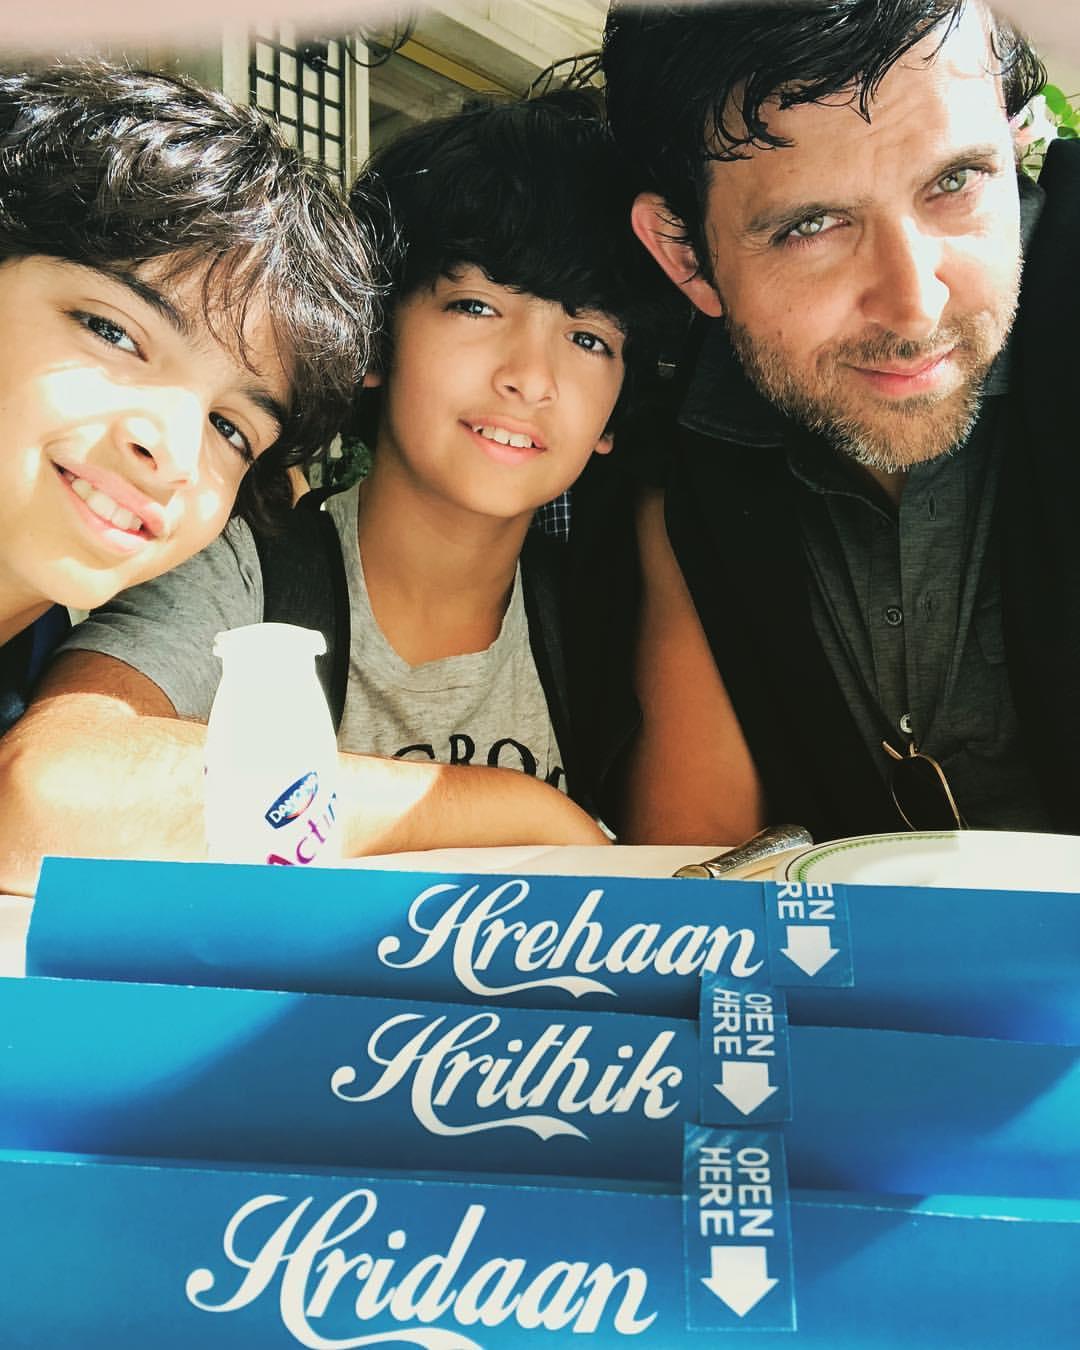 Hrithik Roshan was married to Suzaane Khan. The couple has two children, Hrehaan and Hridhaan.